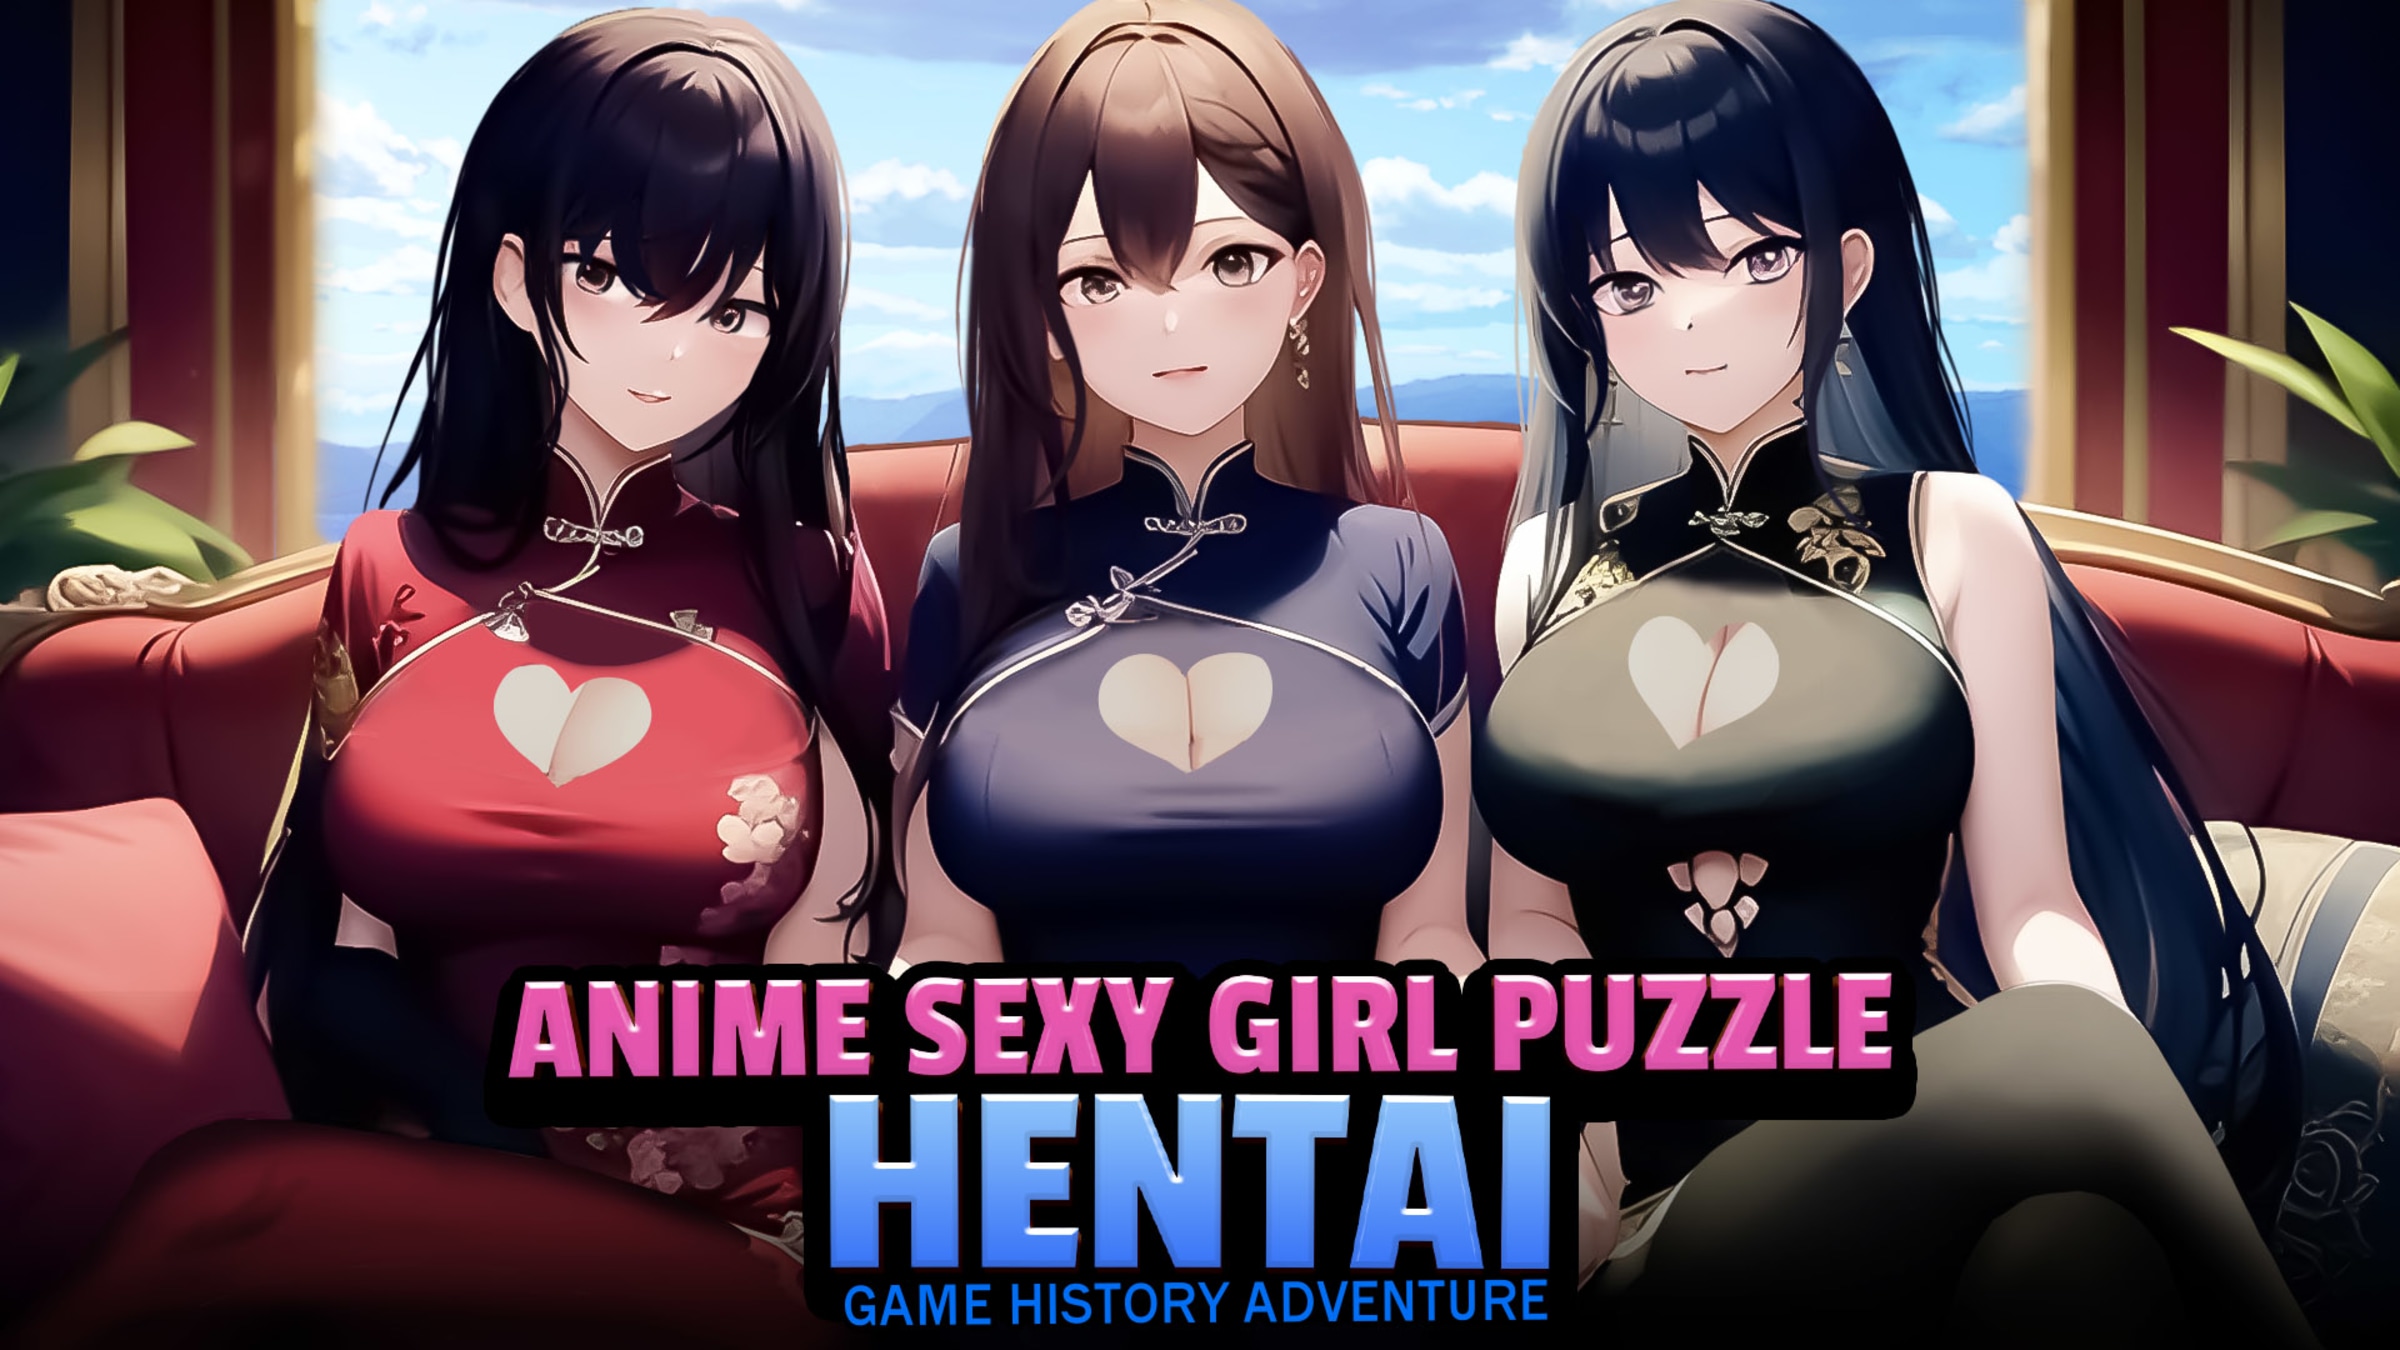 chris d mitchell recommends Sexy Anime Girl Hentai